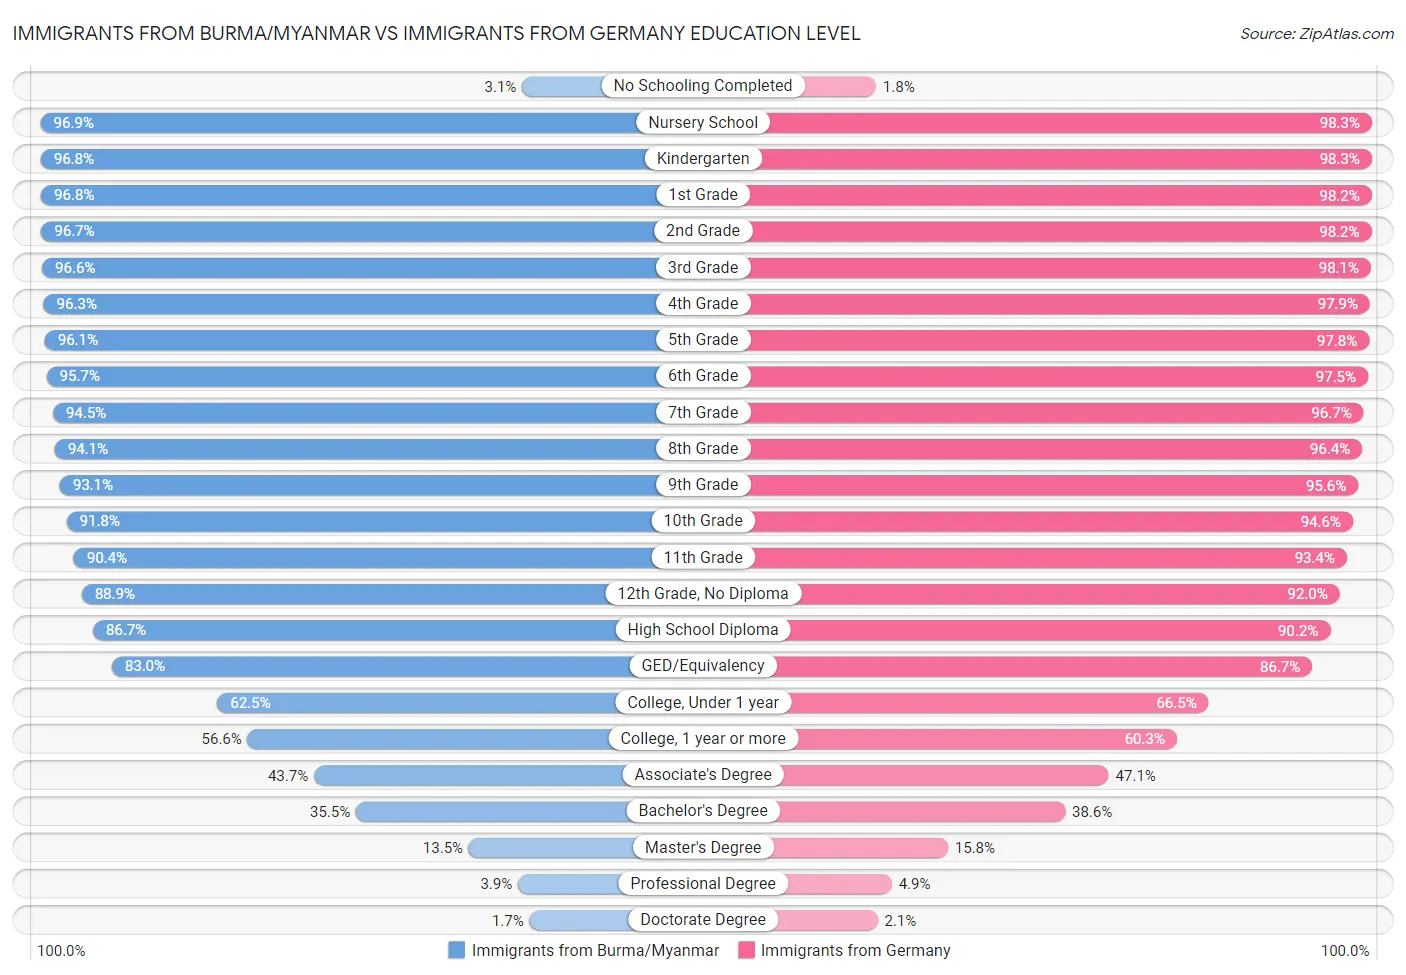 Immigrants from Burma/Myanmar vs Immigrants from Germany Education Level